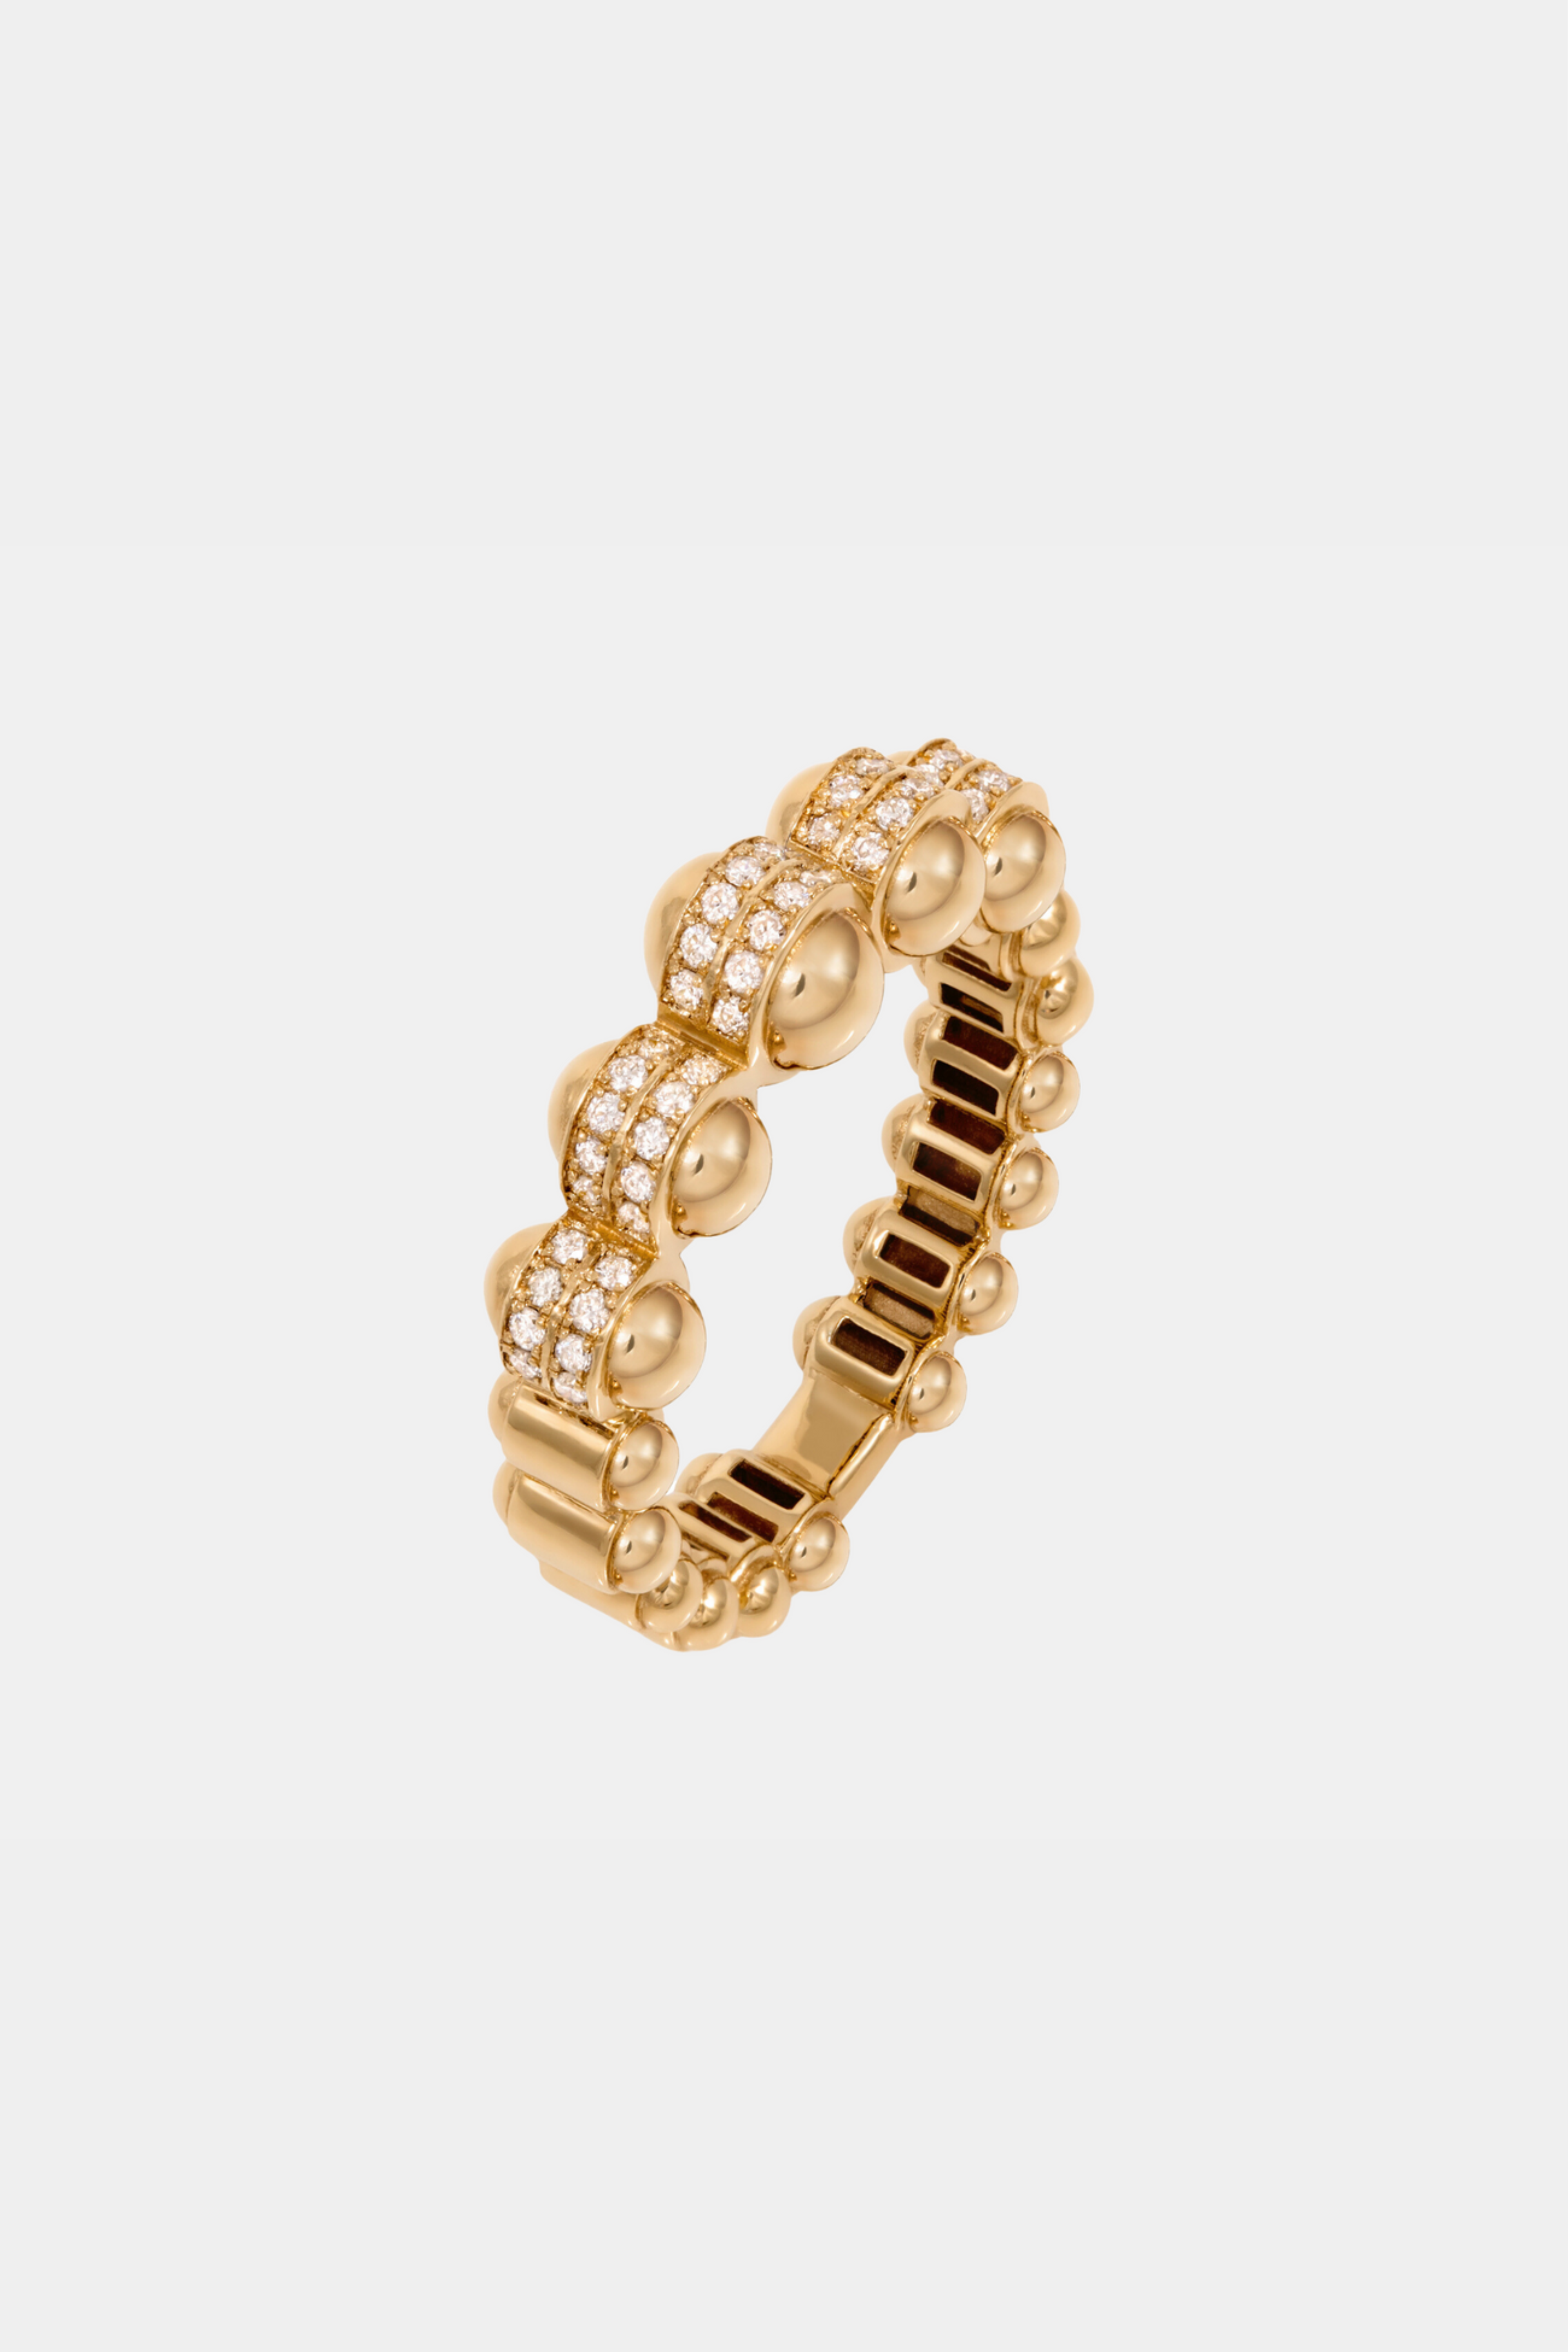 The Gold Atom Ring -Size 3